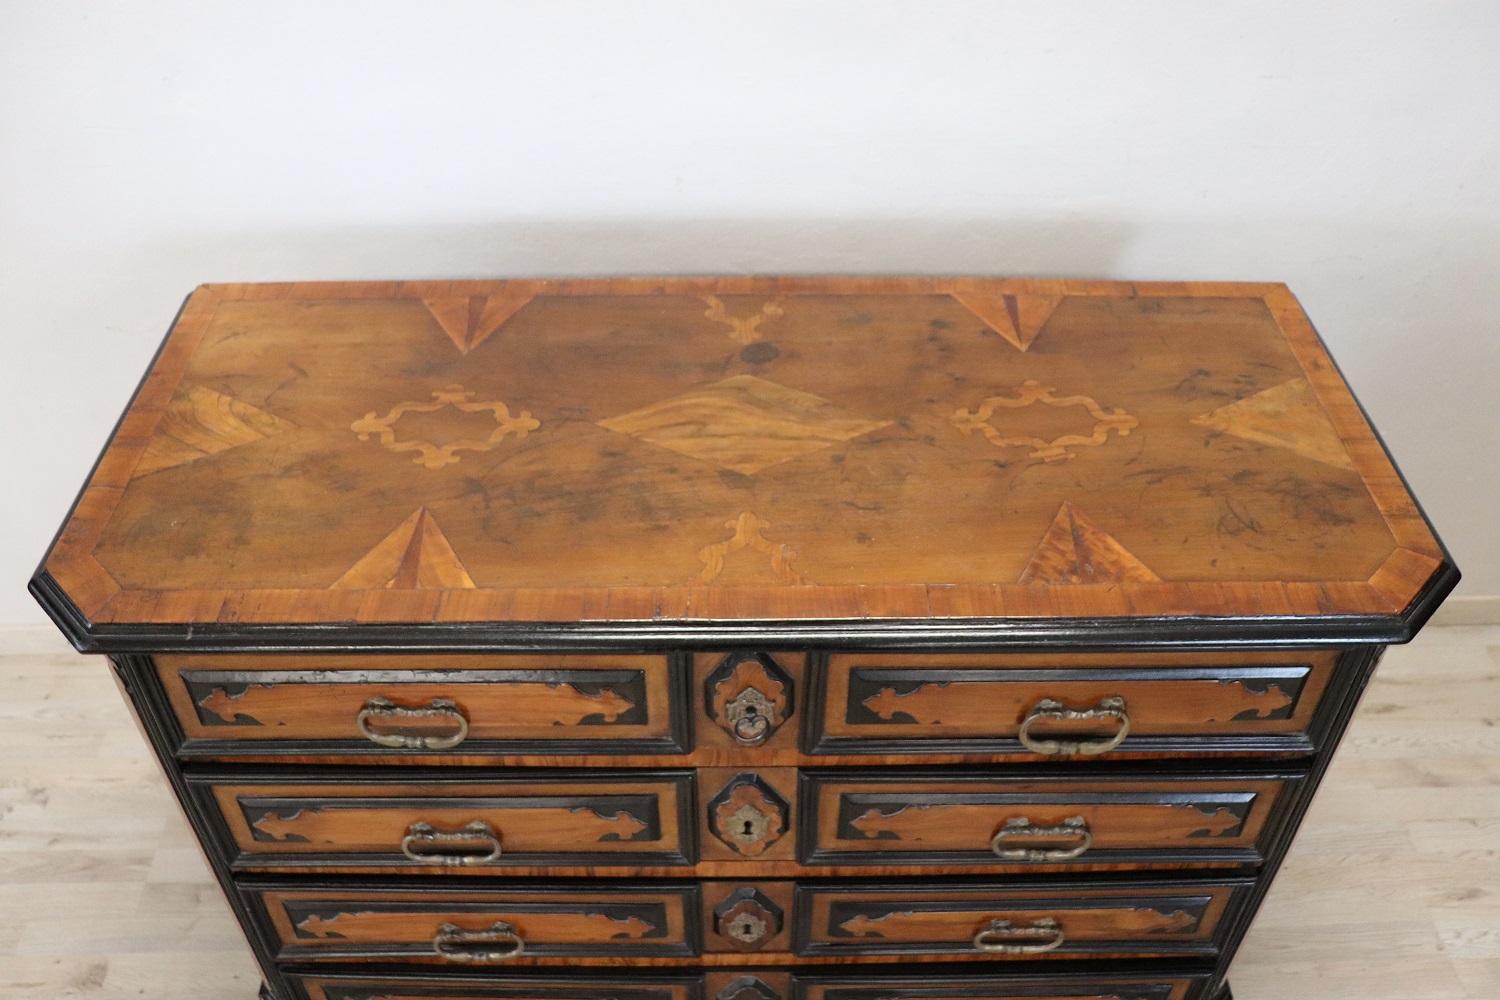 Important antique Italian Louis XIV period chest of drawers 1680s. On the front four large and useful drawers. In the 17th century only important families could afford to have furniture of this value. This chest of drawers comes from an important